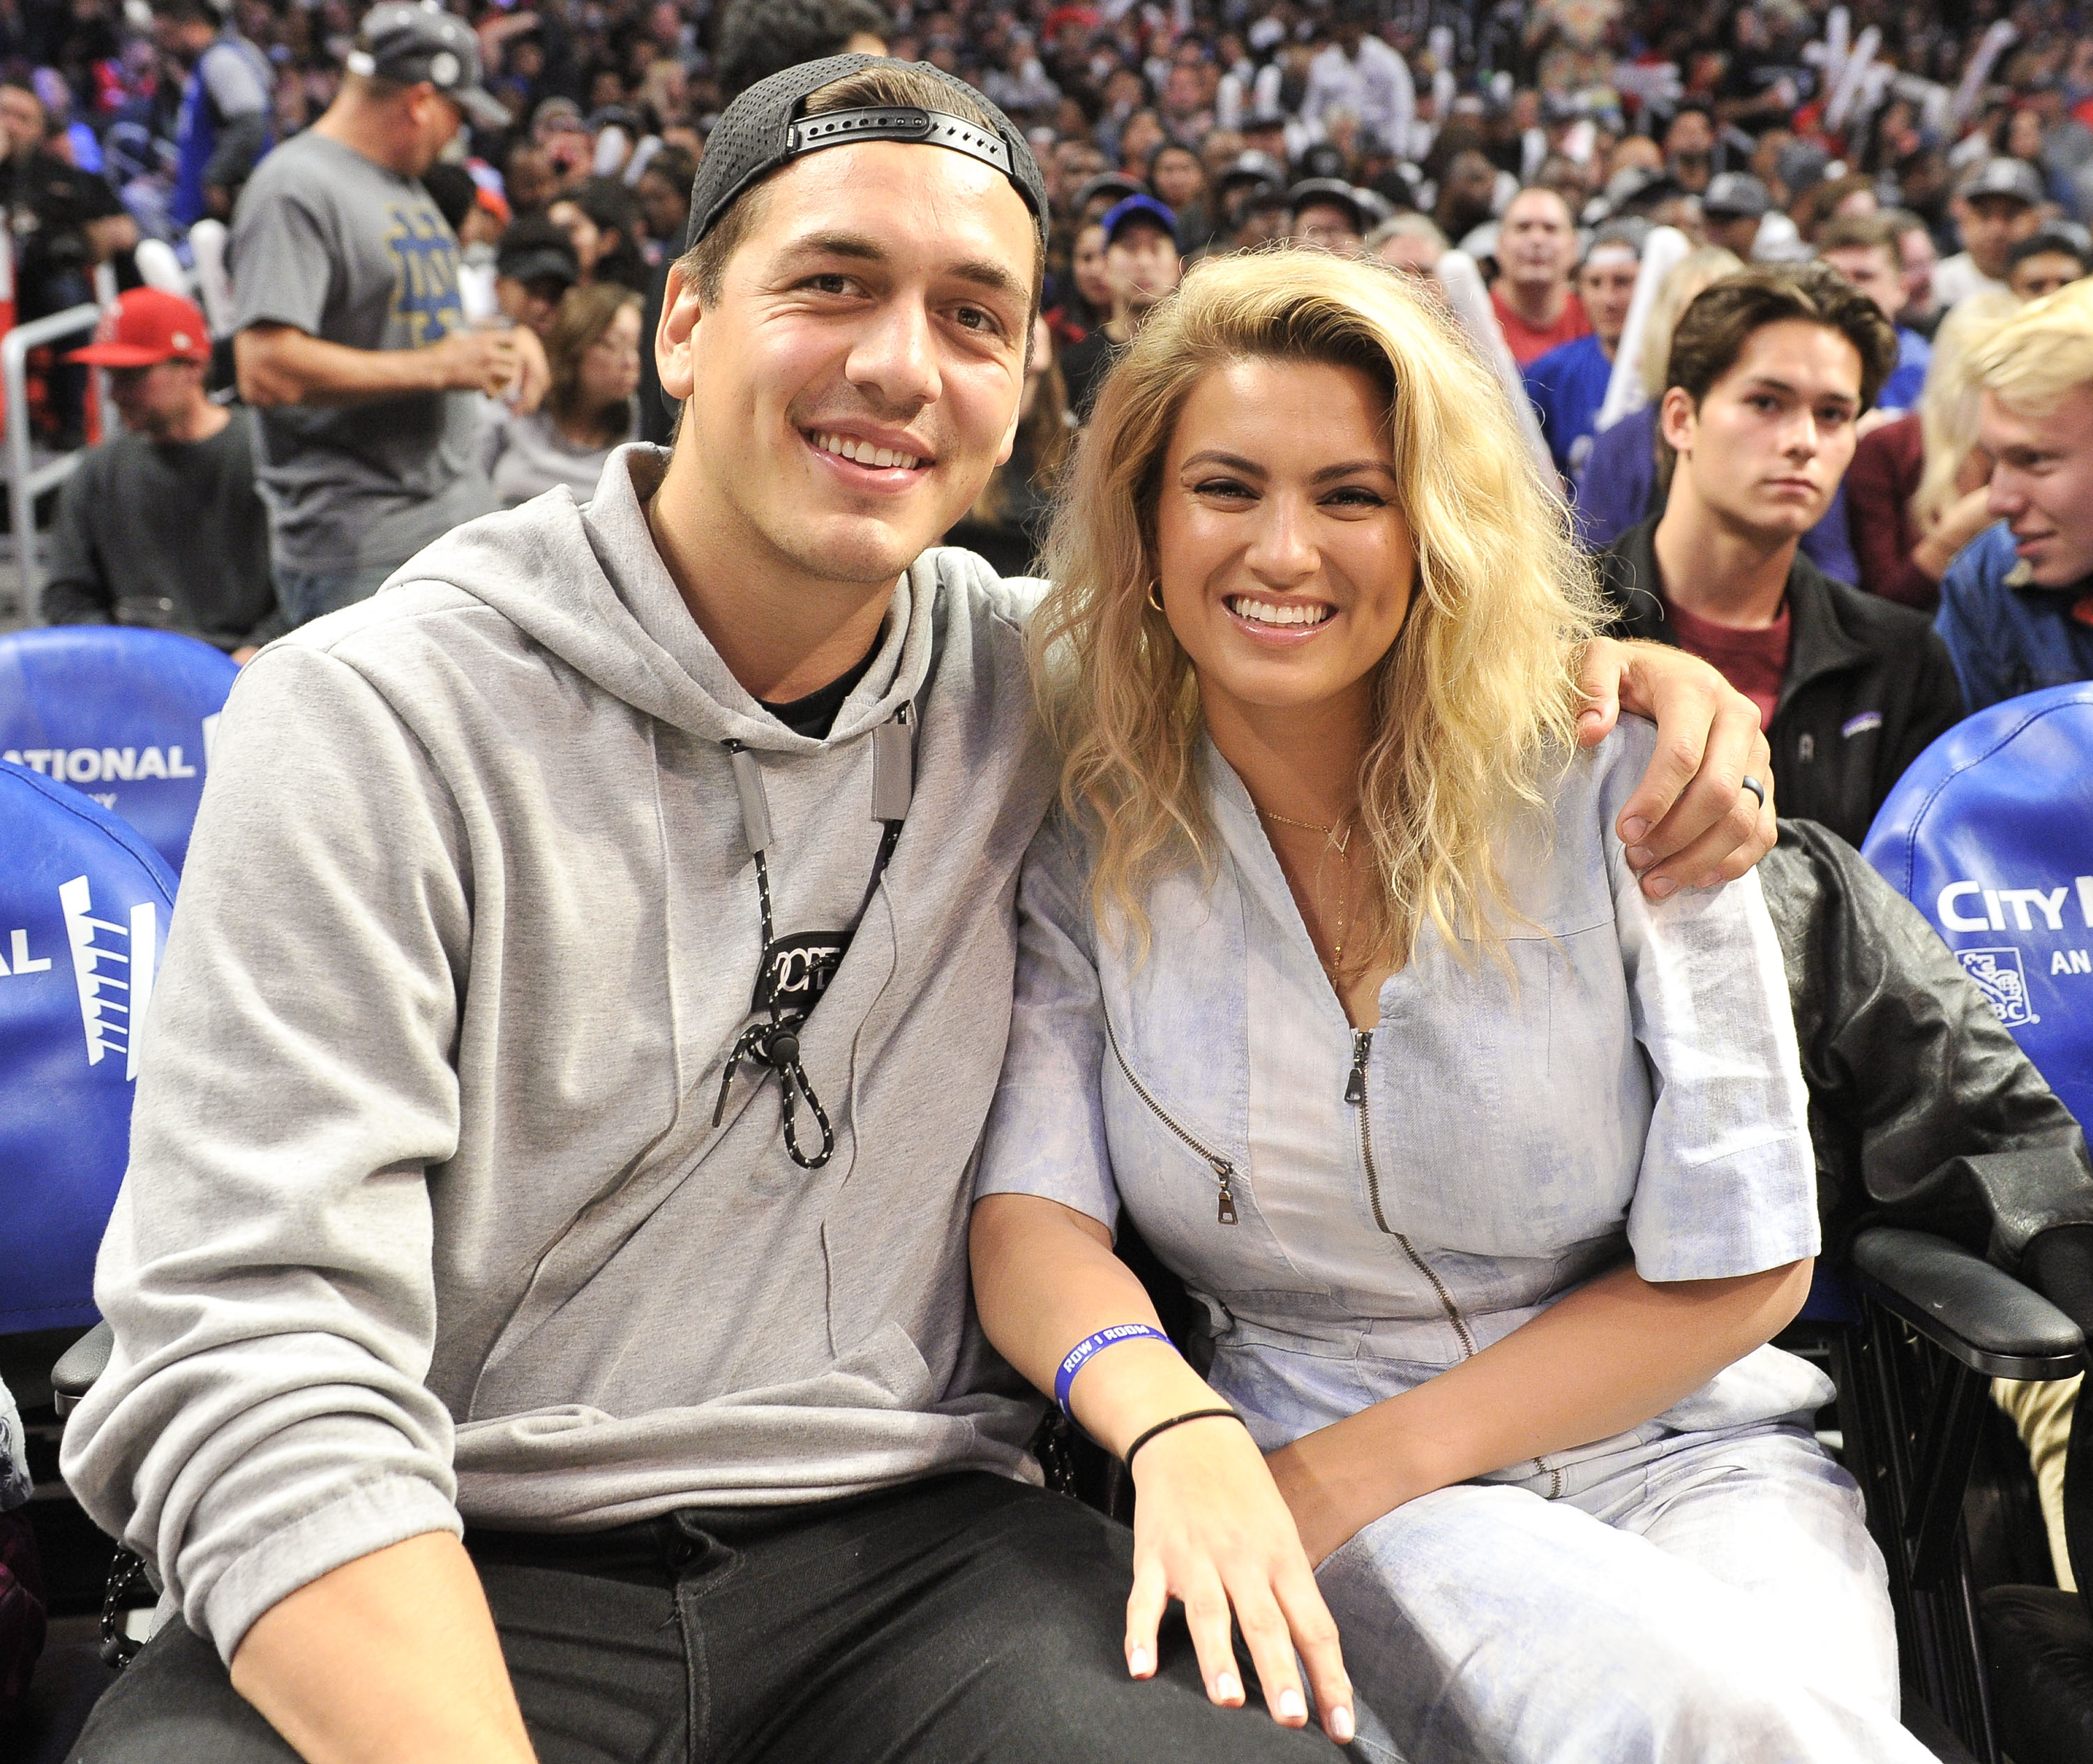 Tori Kelly and André Murillo attend a game between the Los Angeles Clippers and the Atlanta Hawks at Staples Center, on November 16, 2019, in Los Angeles, California. | Source: Getty Images